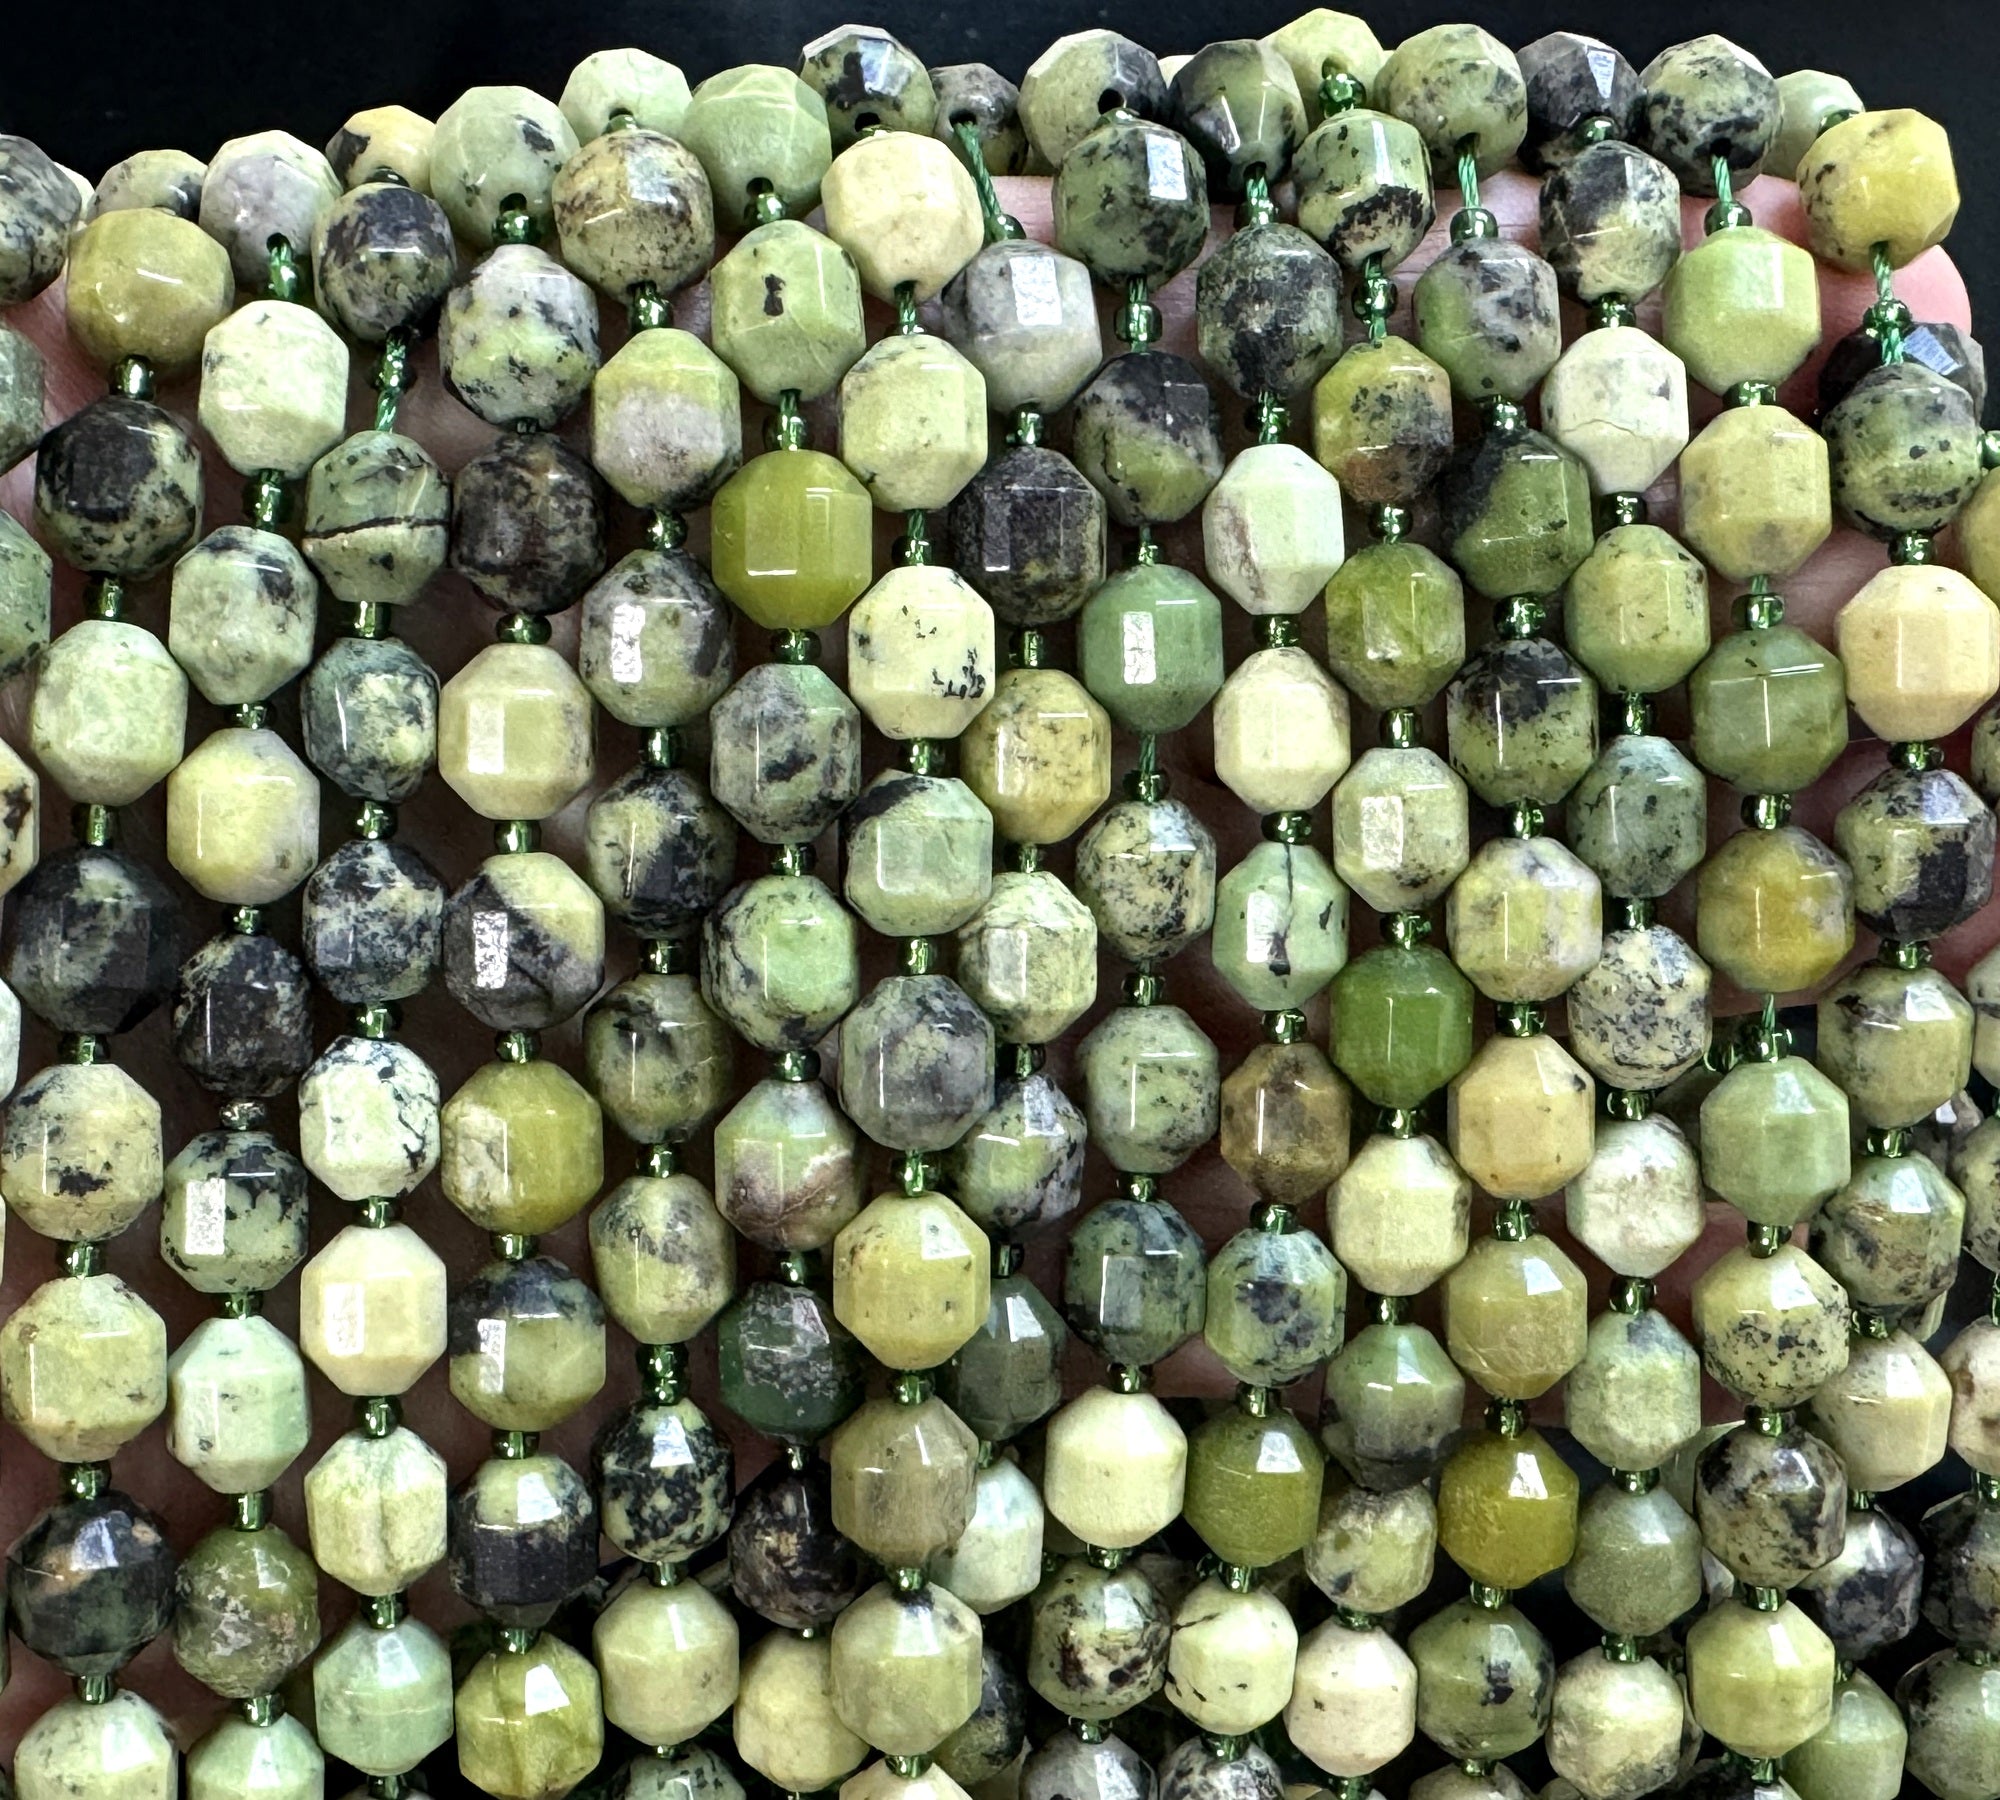 Chrysoprase faceted 8x9mm energy prism natural gemstone beads 15" strand